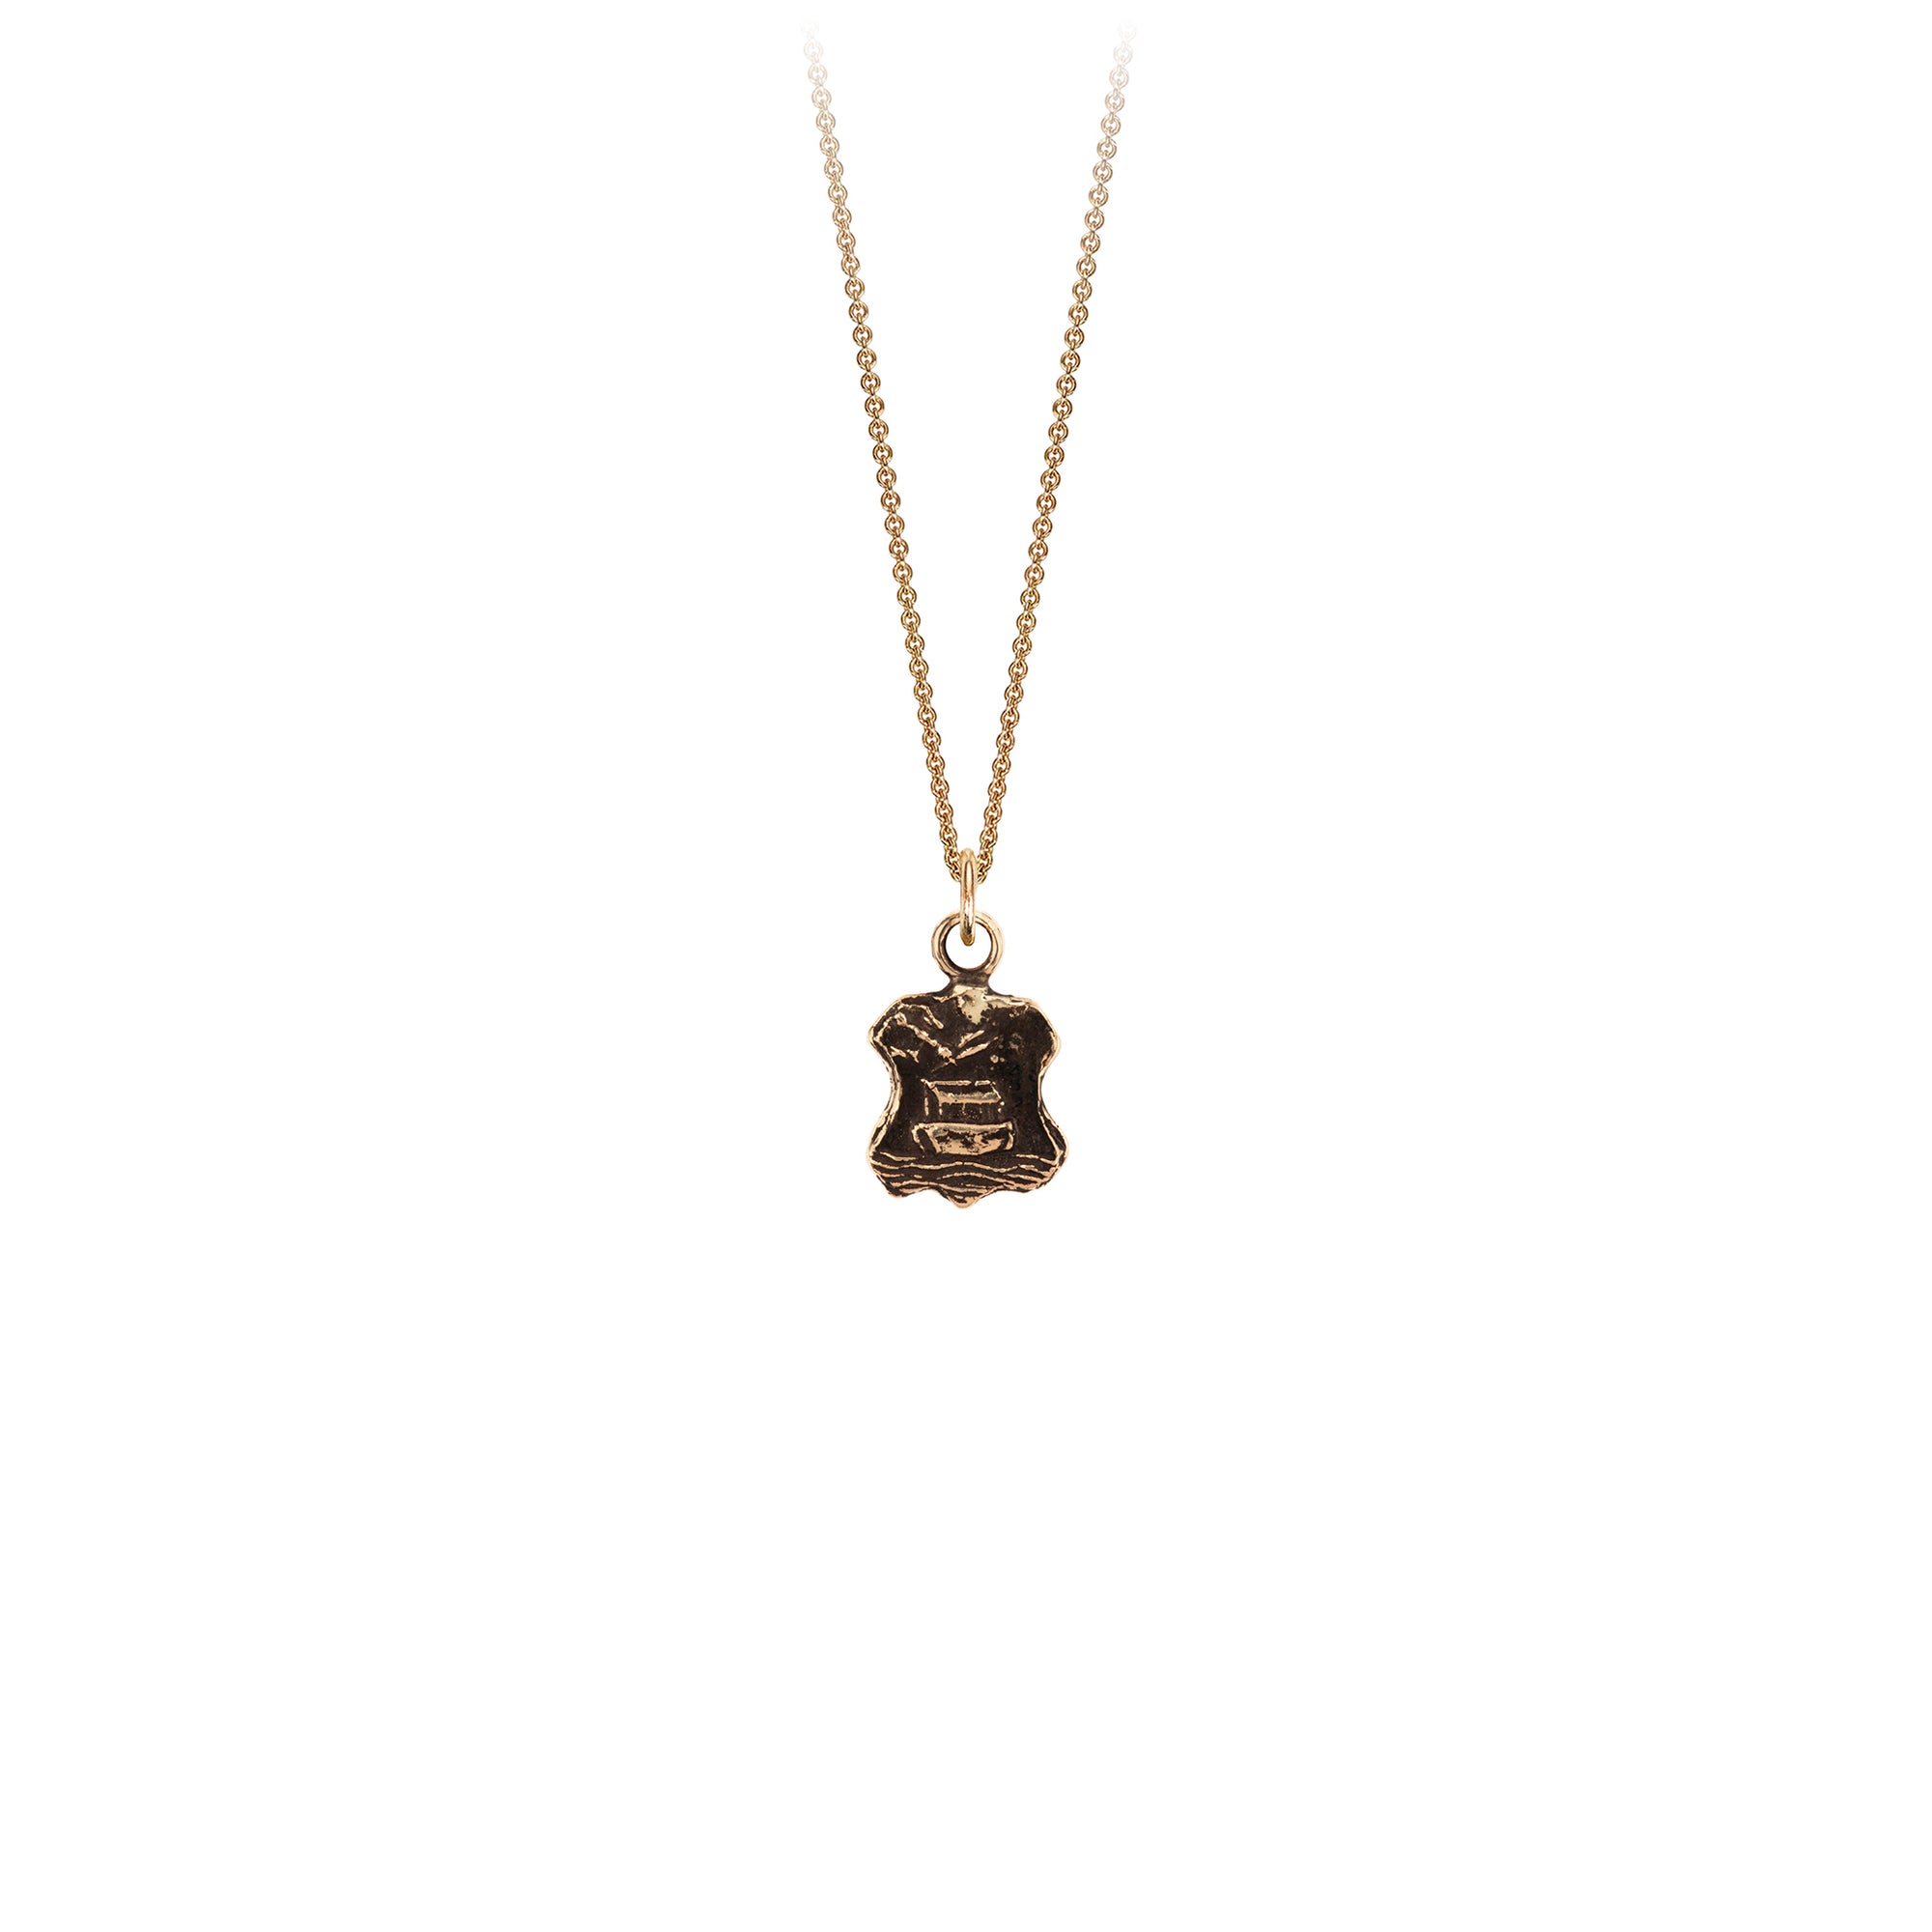 A 14k gold chain with our 14k gold Have Faith talisman.